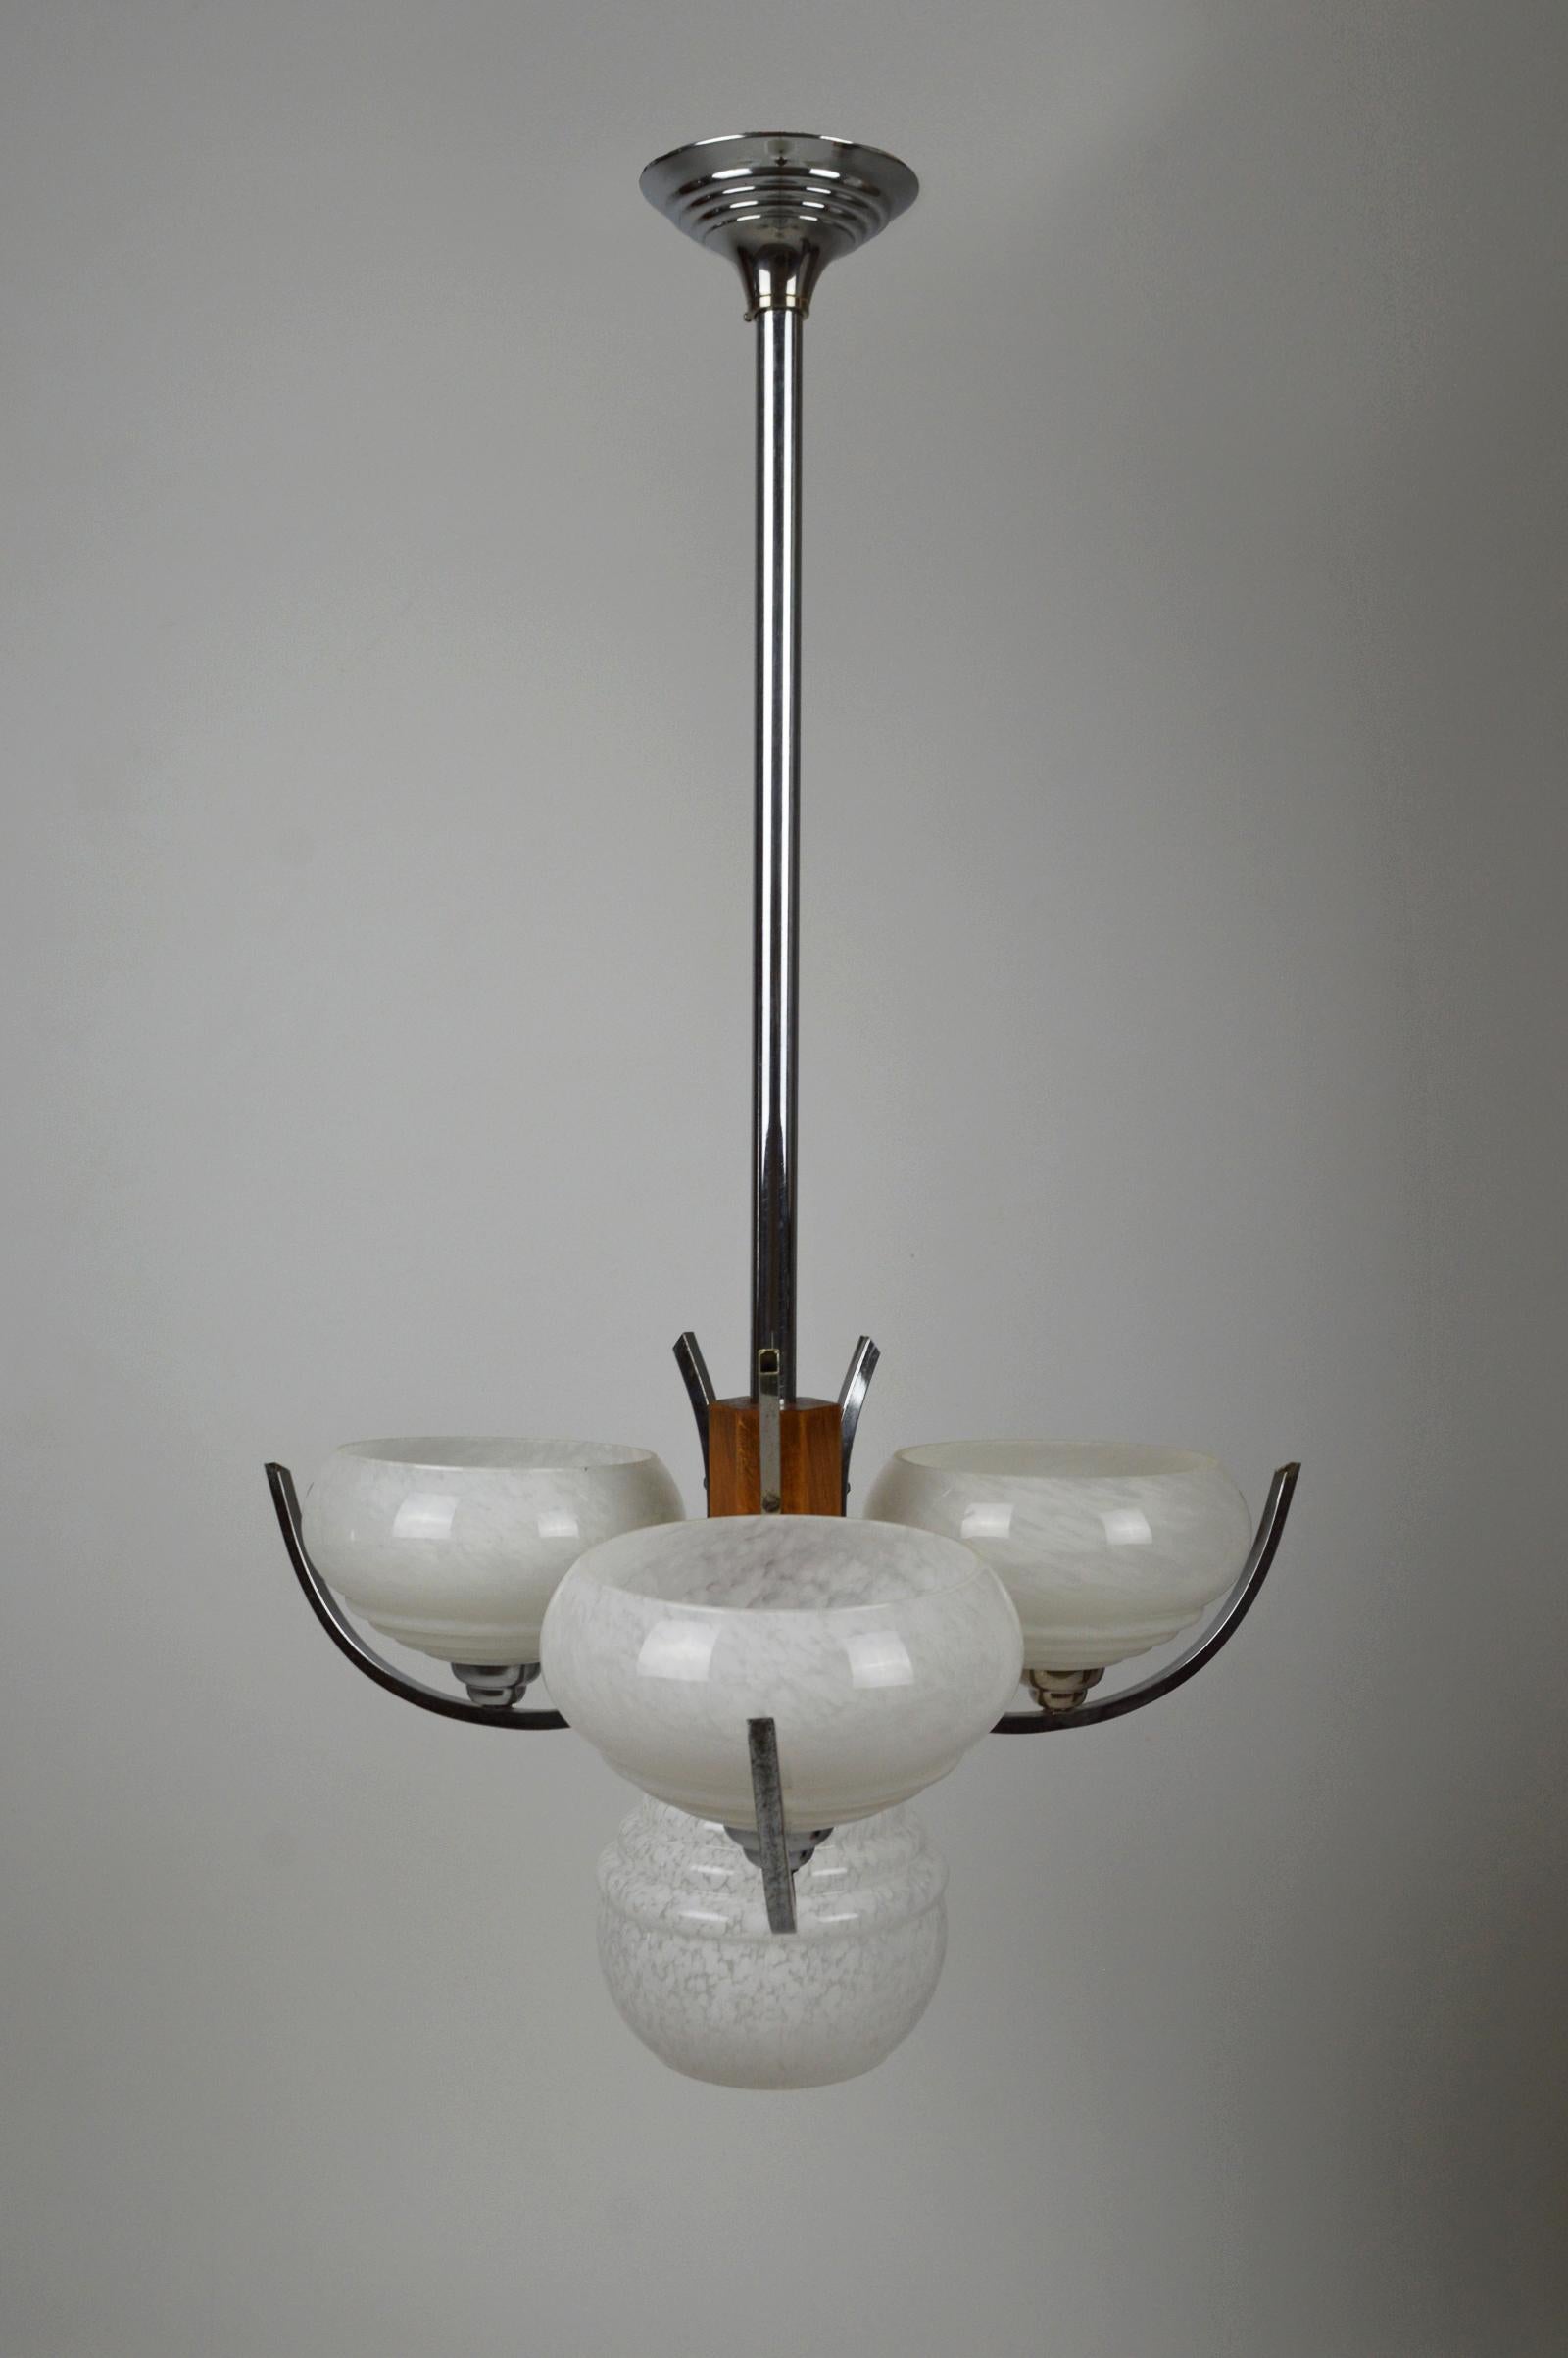 Nice modernist 4-lights and 3-arm chandelier with base in chrome / nickel plated brass, exotic wood and milky opalines.

Art Deco Modernist / Mid-Century Modern style, France, circa 1940-1950.

Completely restored, dismantled, electrification